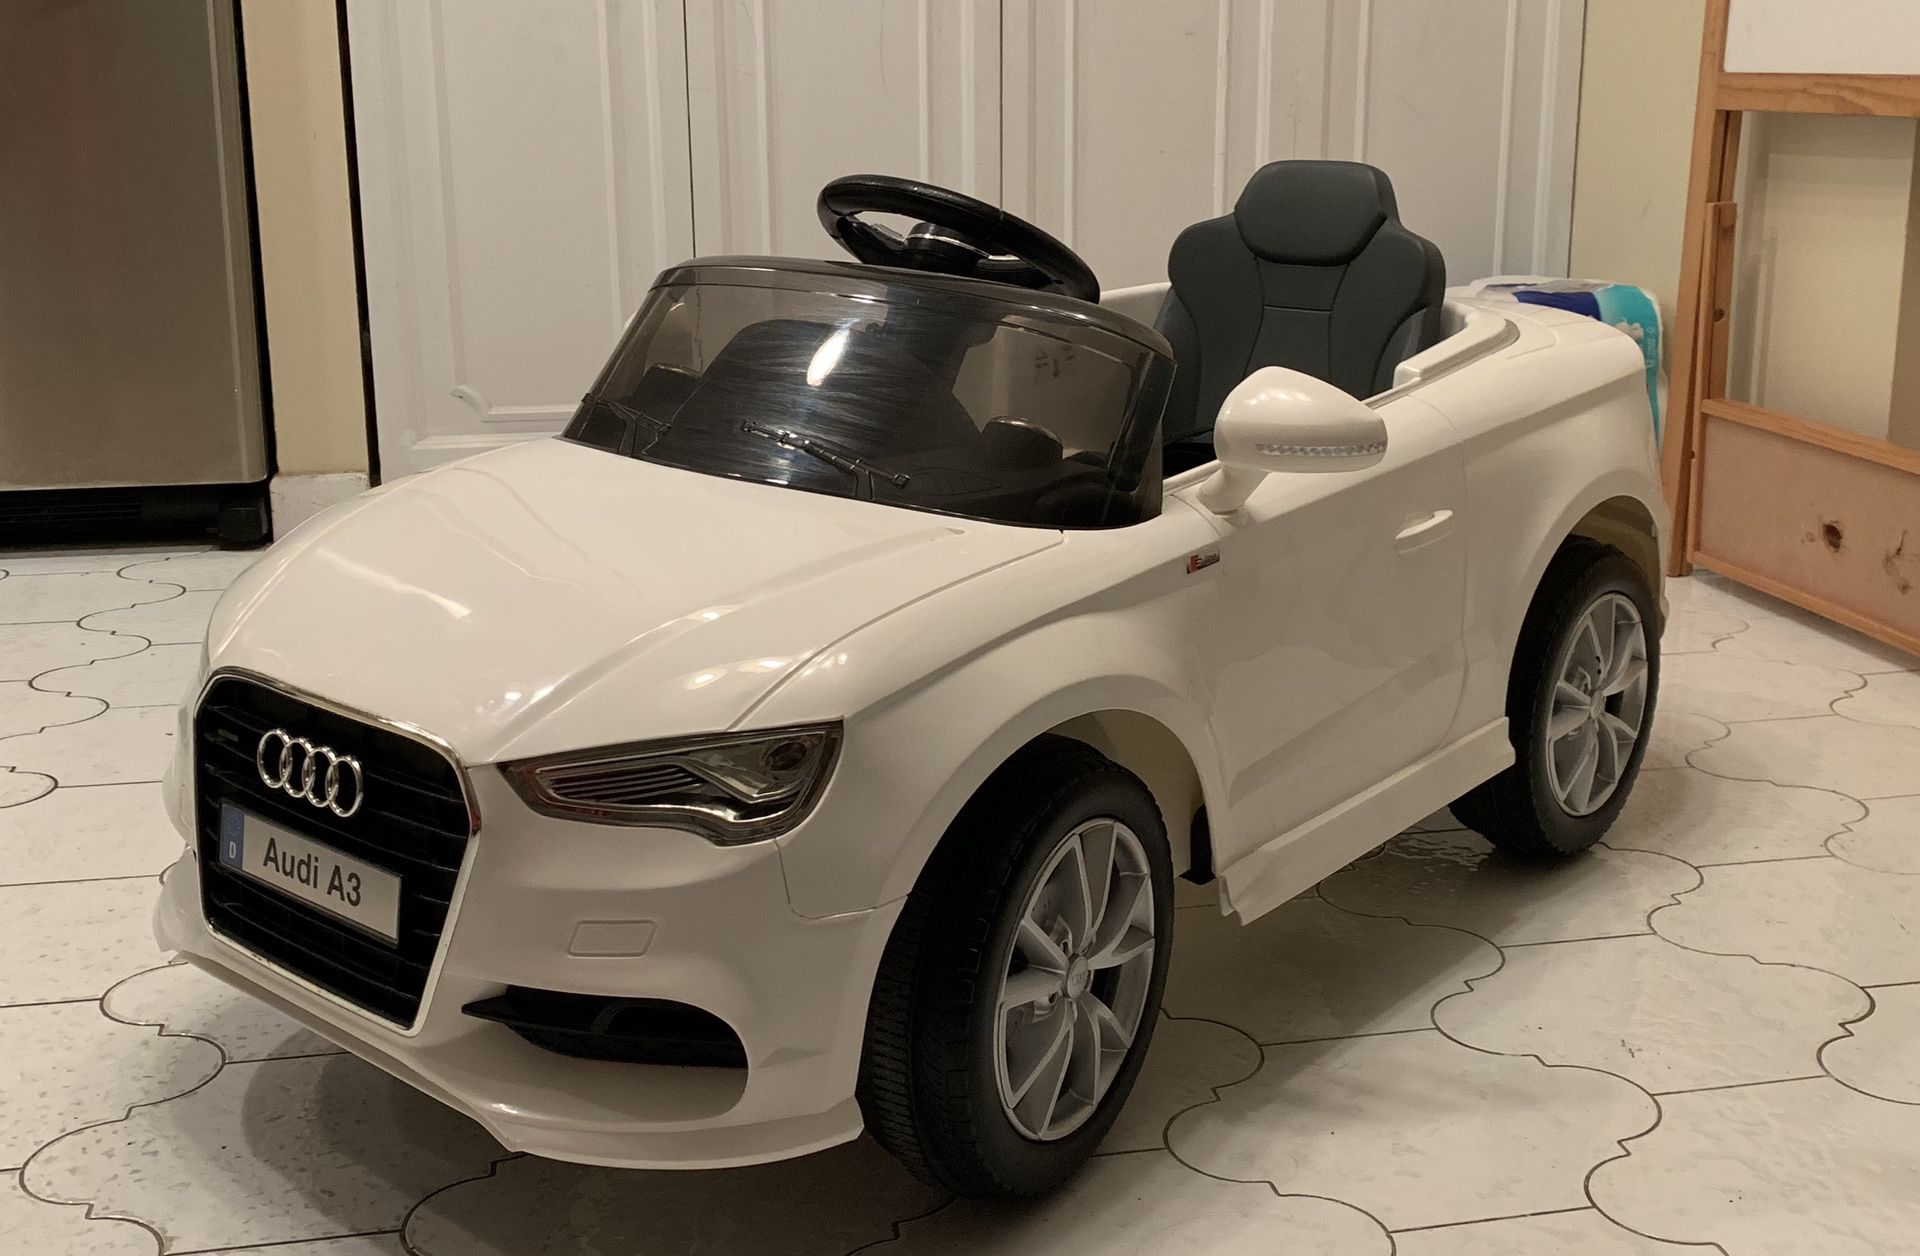 Power wheels, ride on toys, toy car, baby car, toddlers Electric kids car 12V Audi A3 REMOTE CONTROL